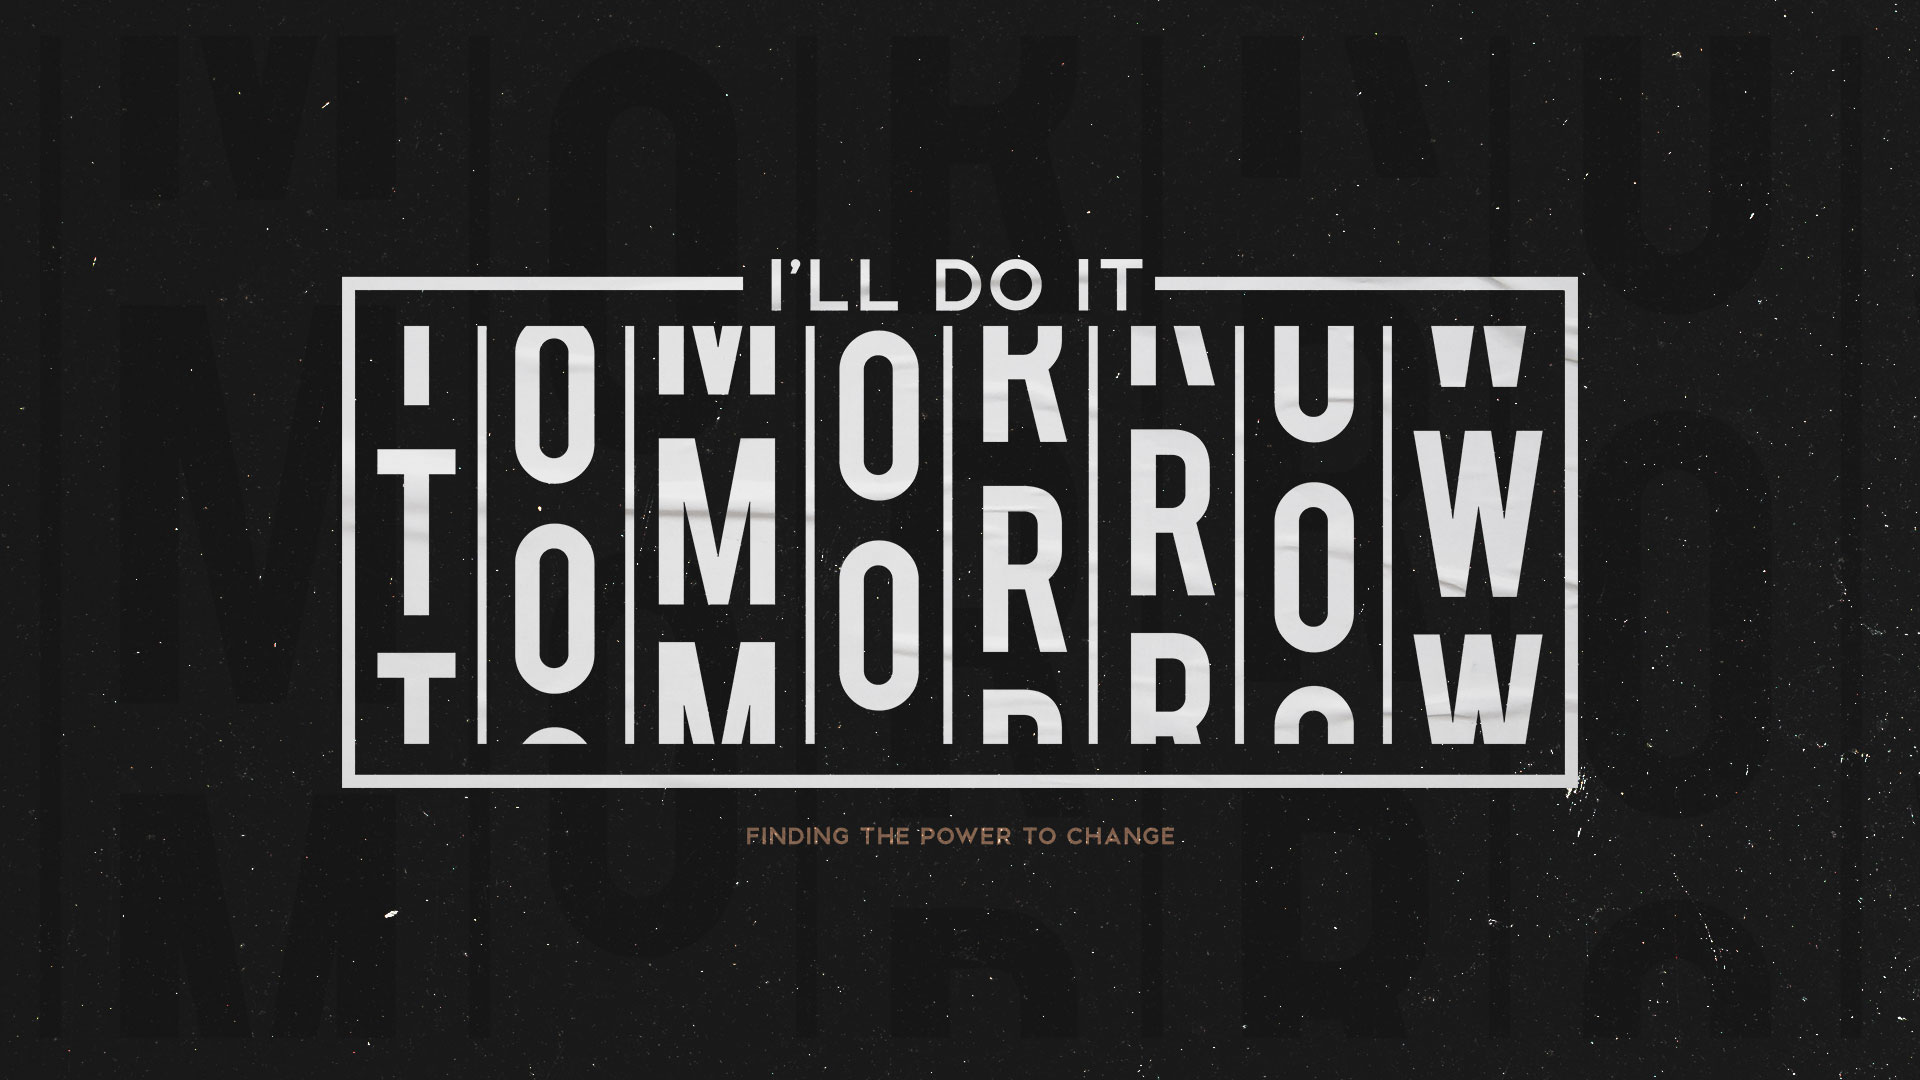 "I'll Do It Tomorrow: Finding The Power To Change" Message Series